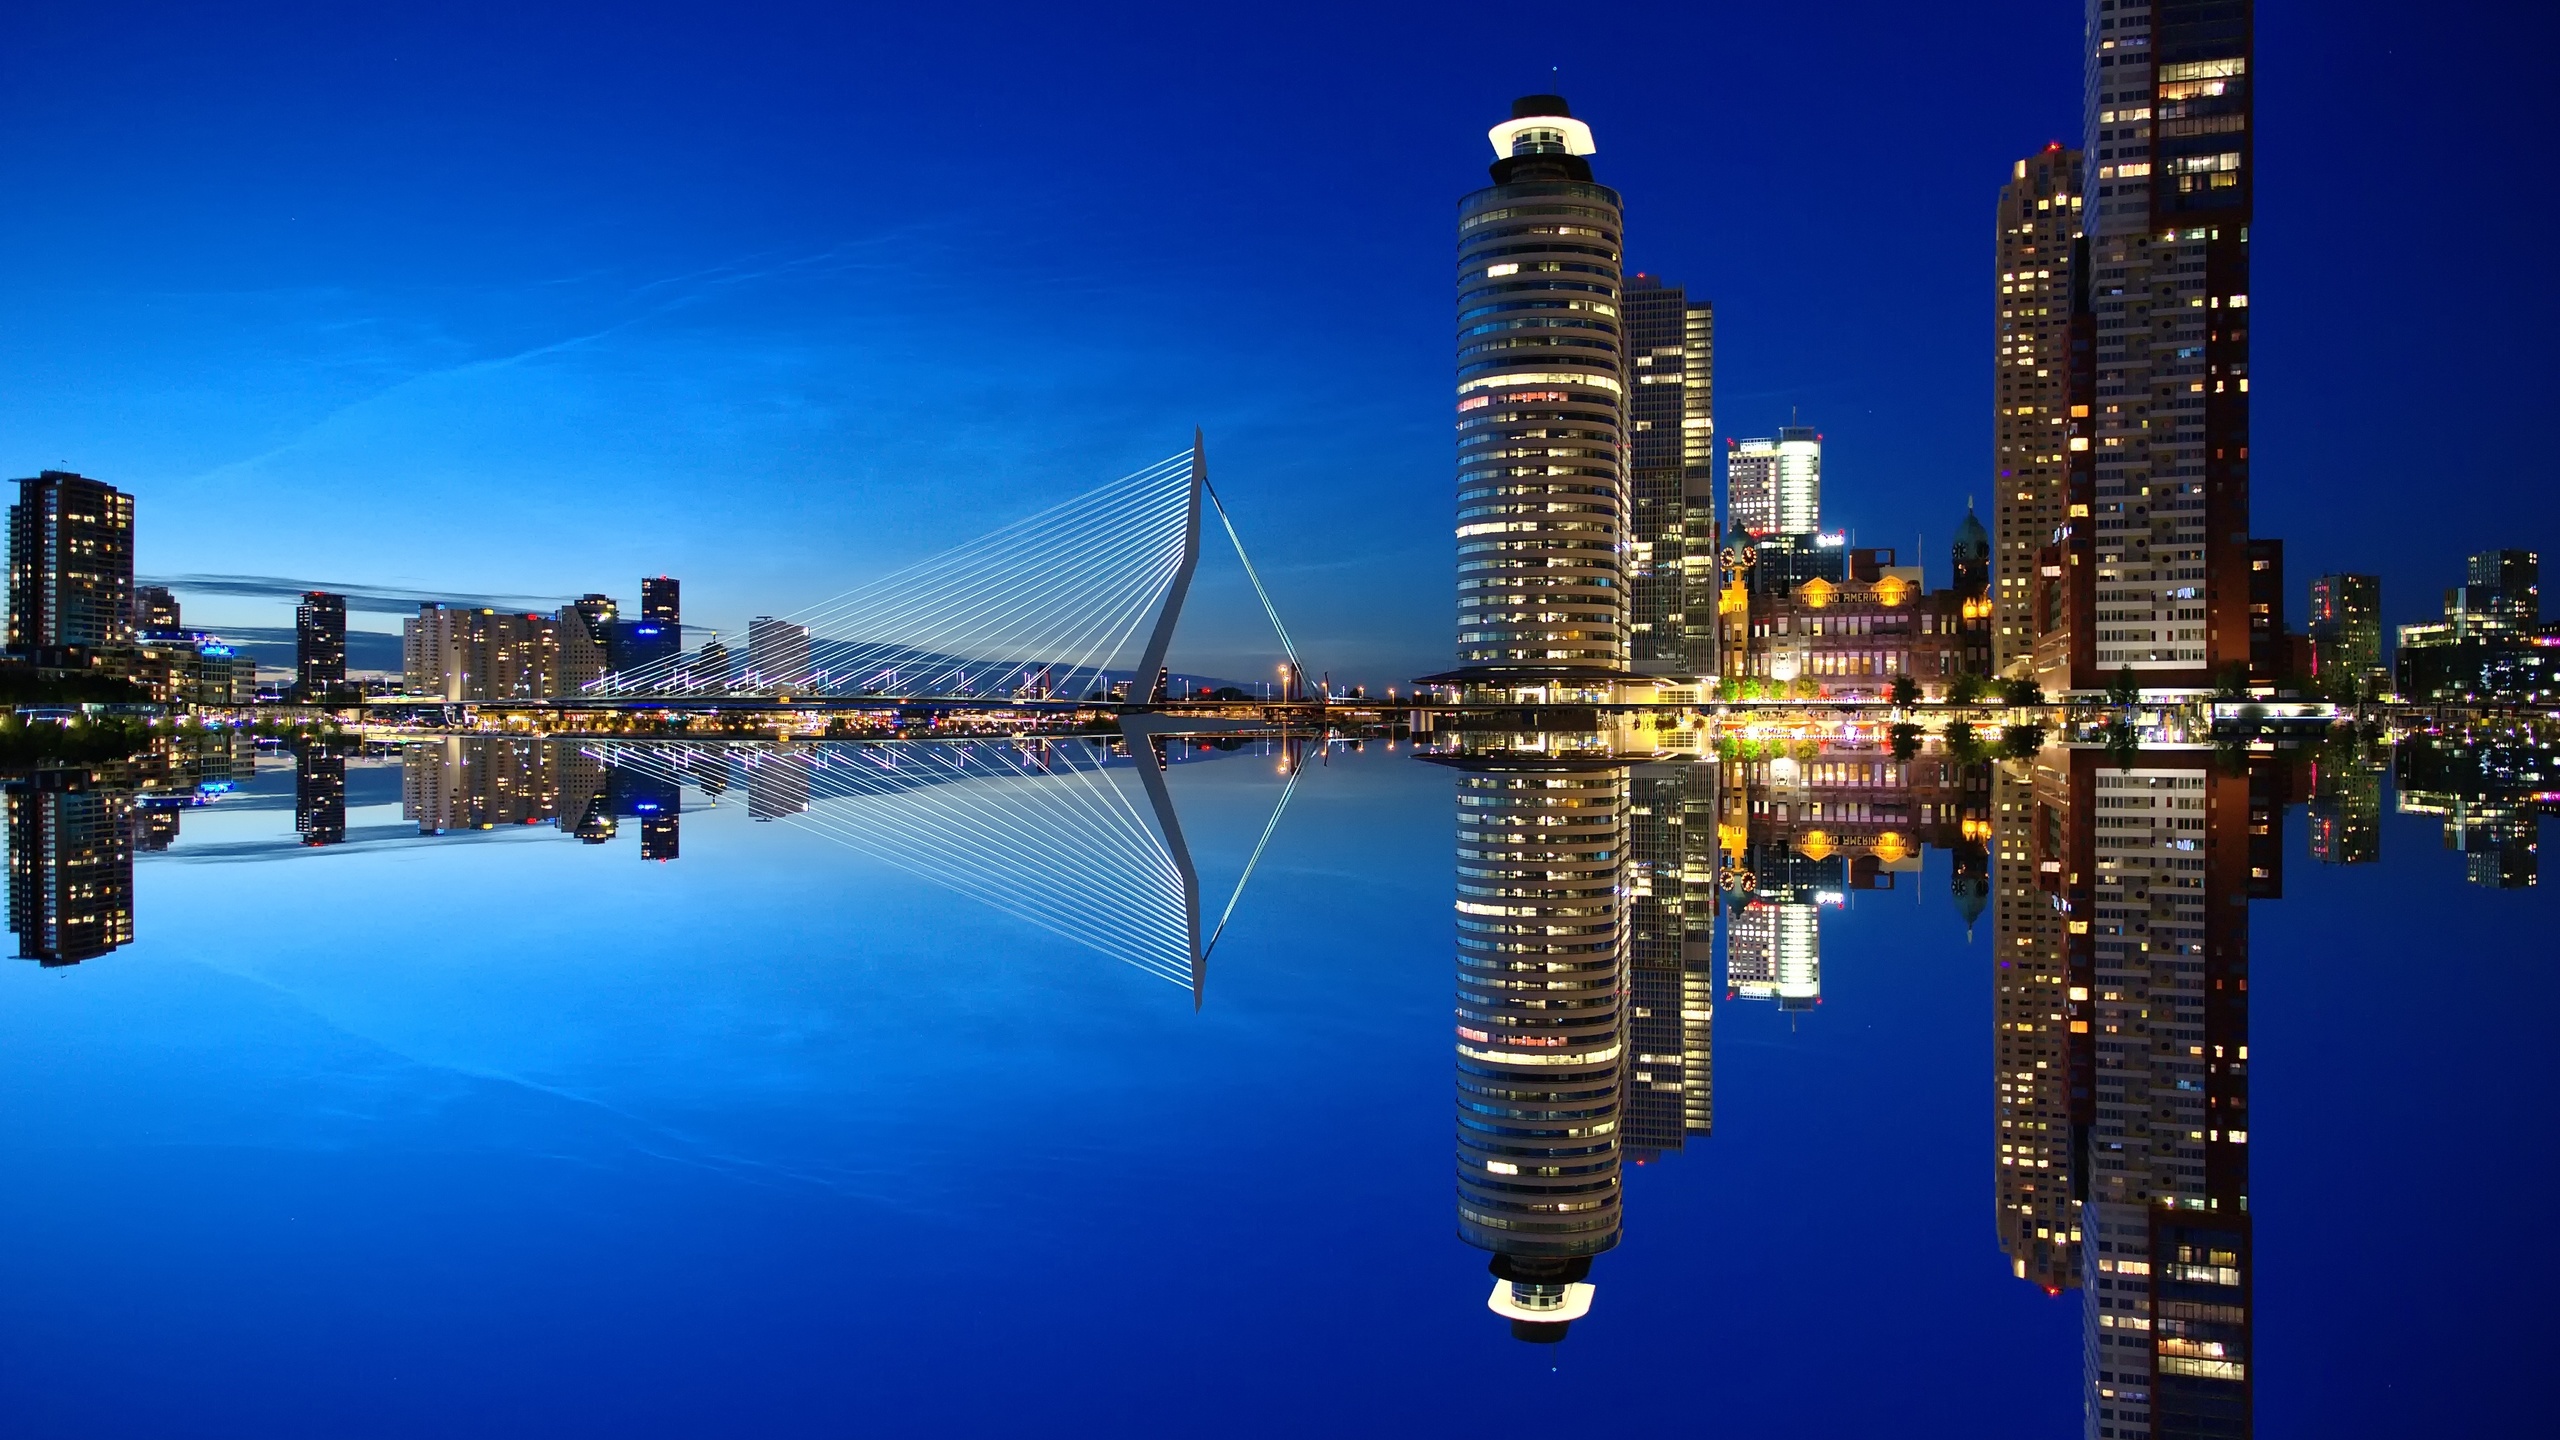 , , , , , , , , , , the sky, holland, night, rotterdam, water, the city, skyscrapers, architecture, port, netherlands